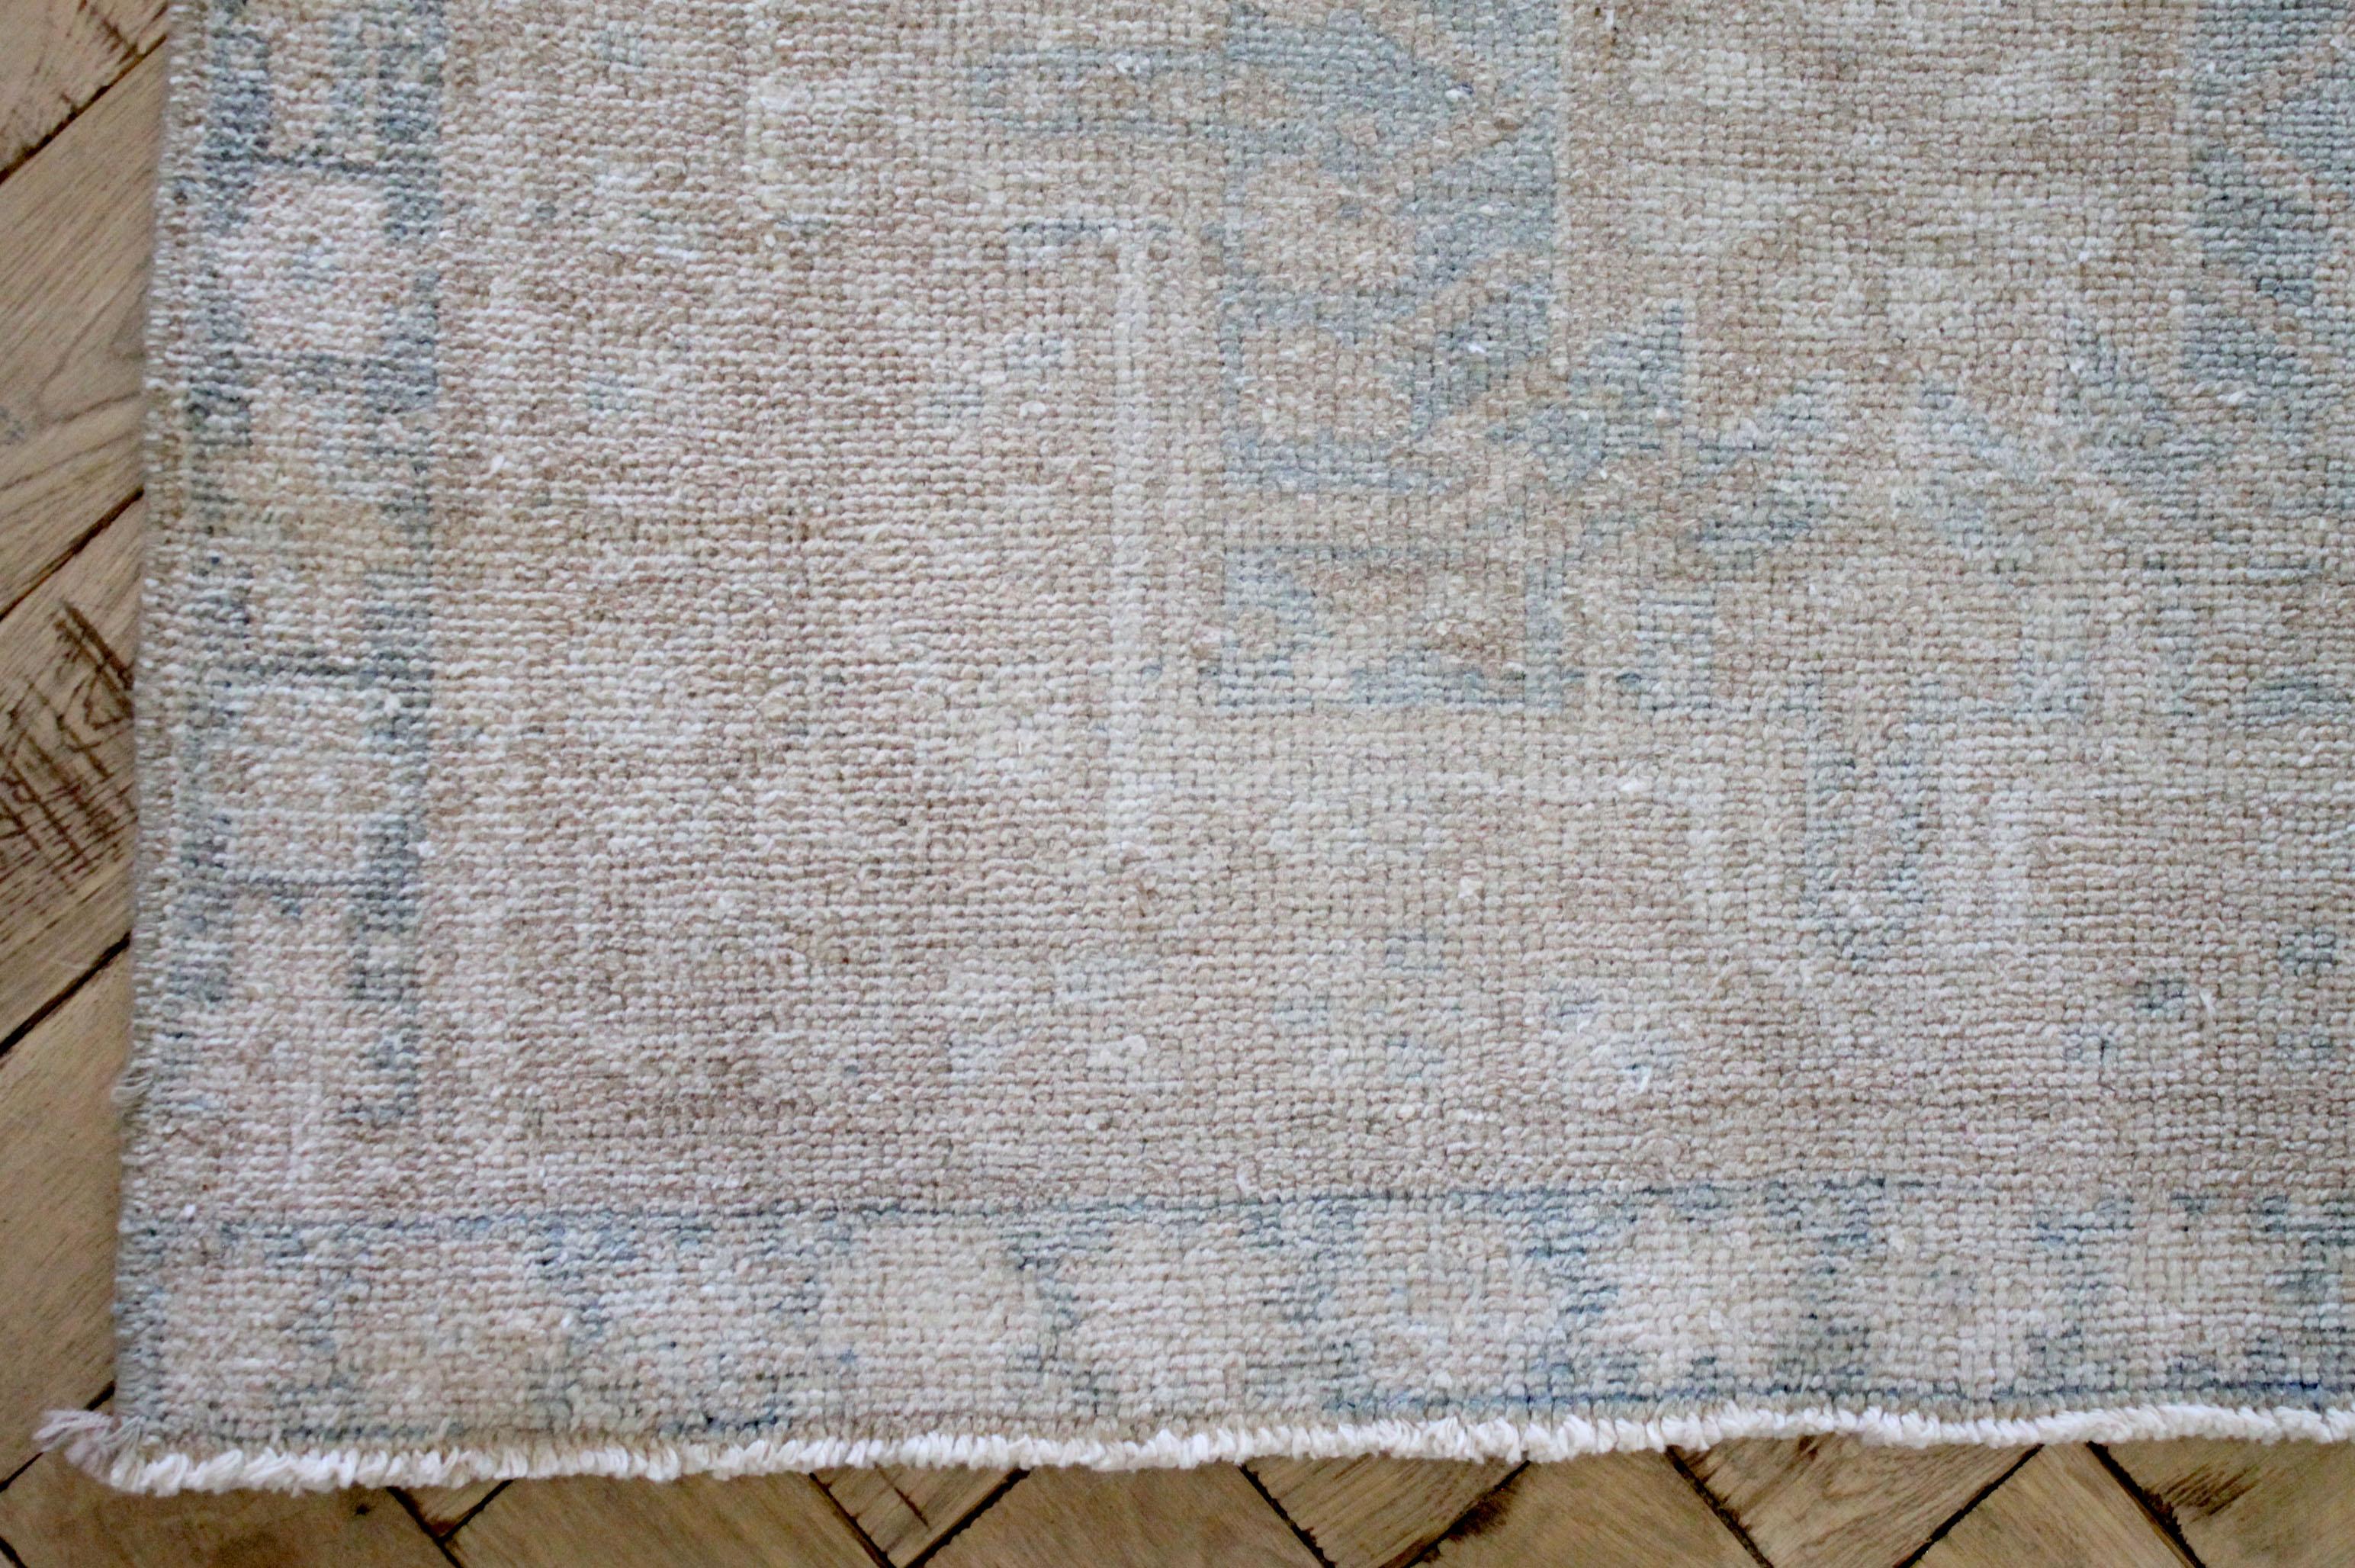 Beautiful long vintage Turkish rug in warm natural tones with soft blues.
Great for a kitchen, hall or bathroom.
Measures: 2'7